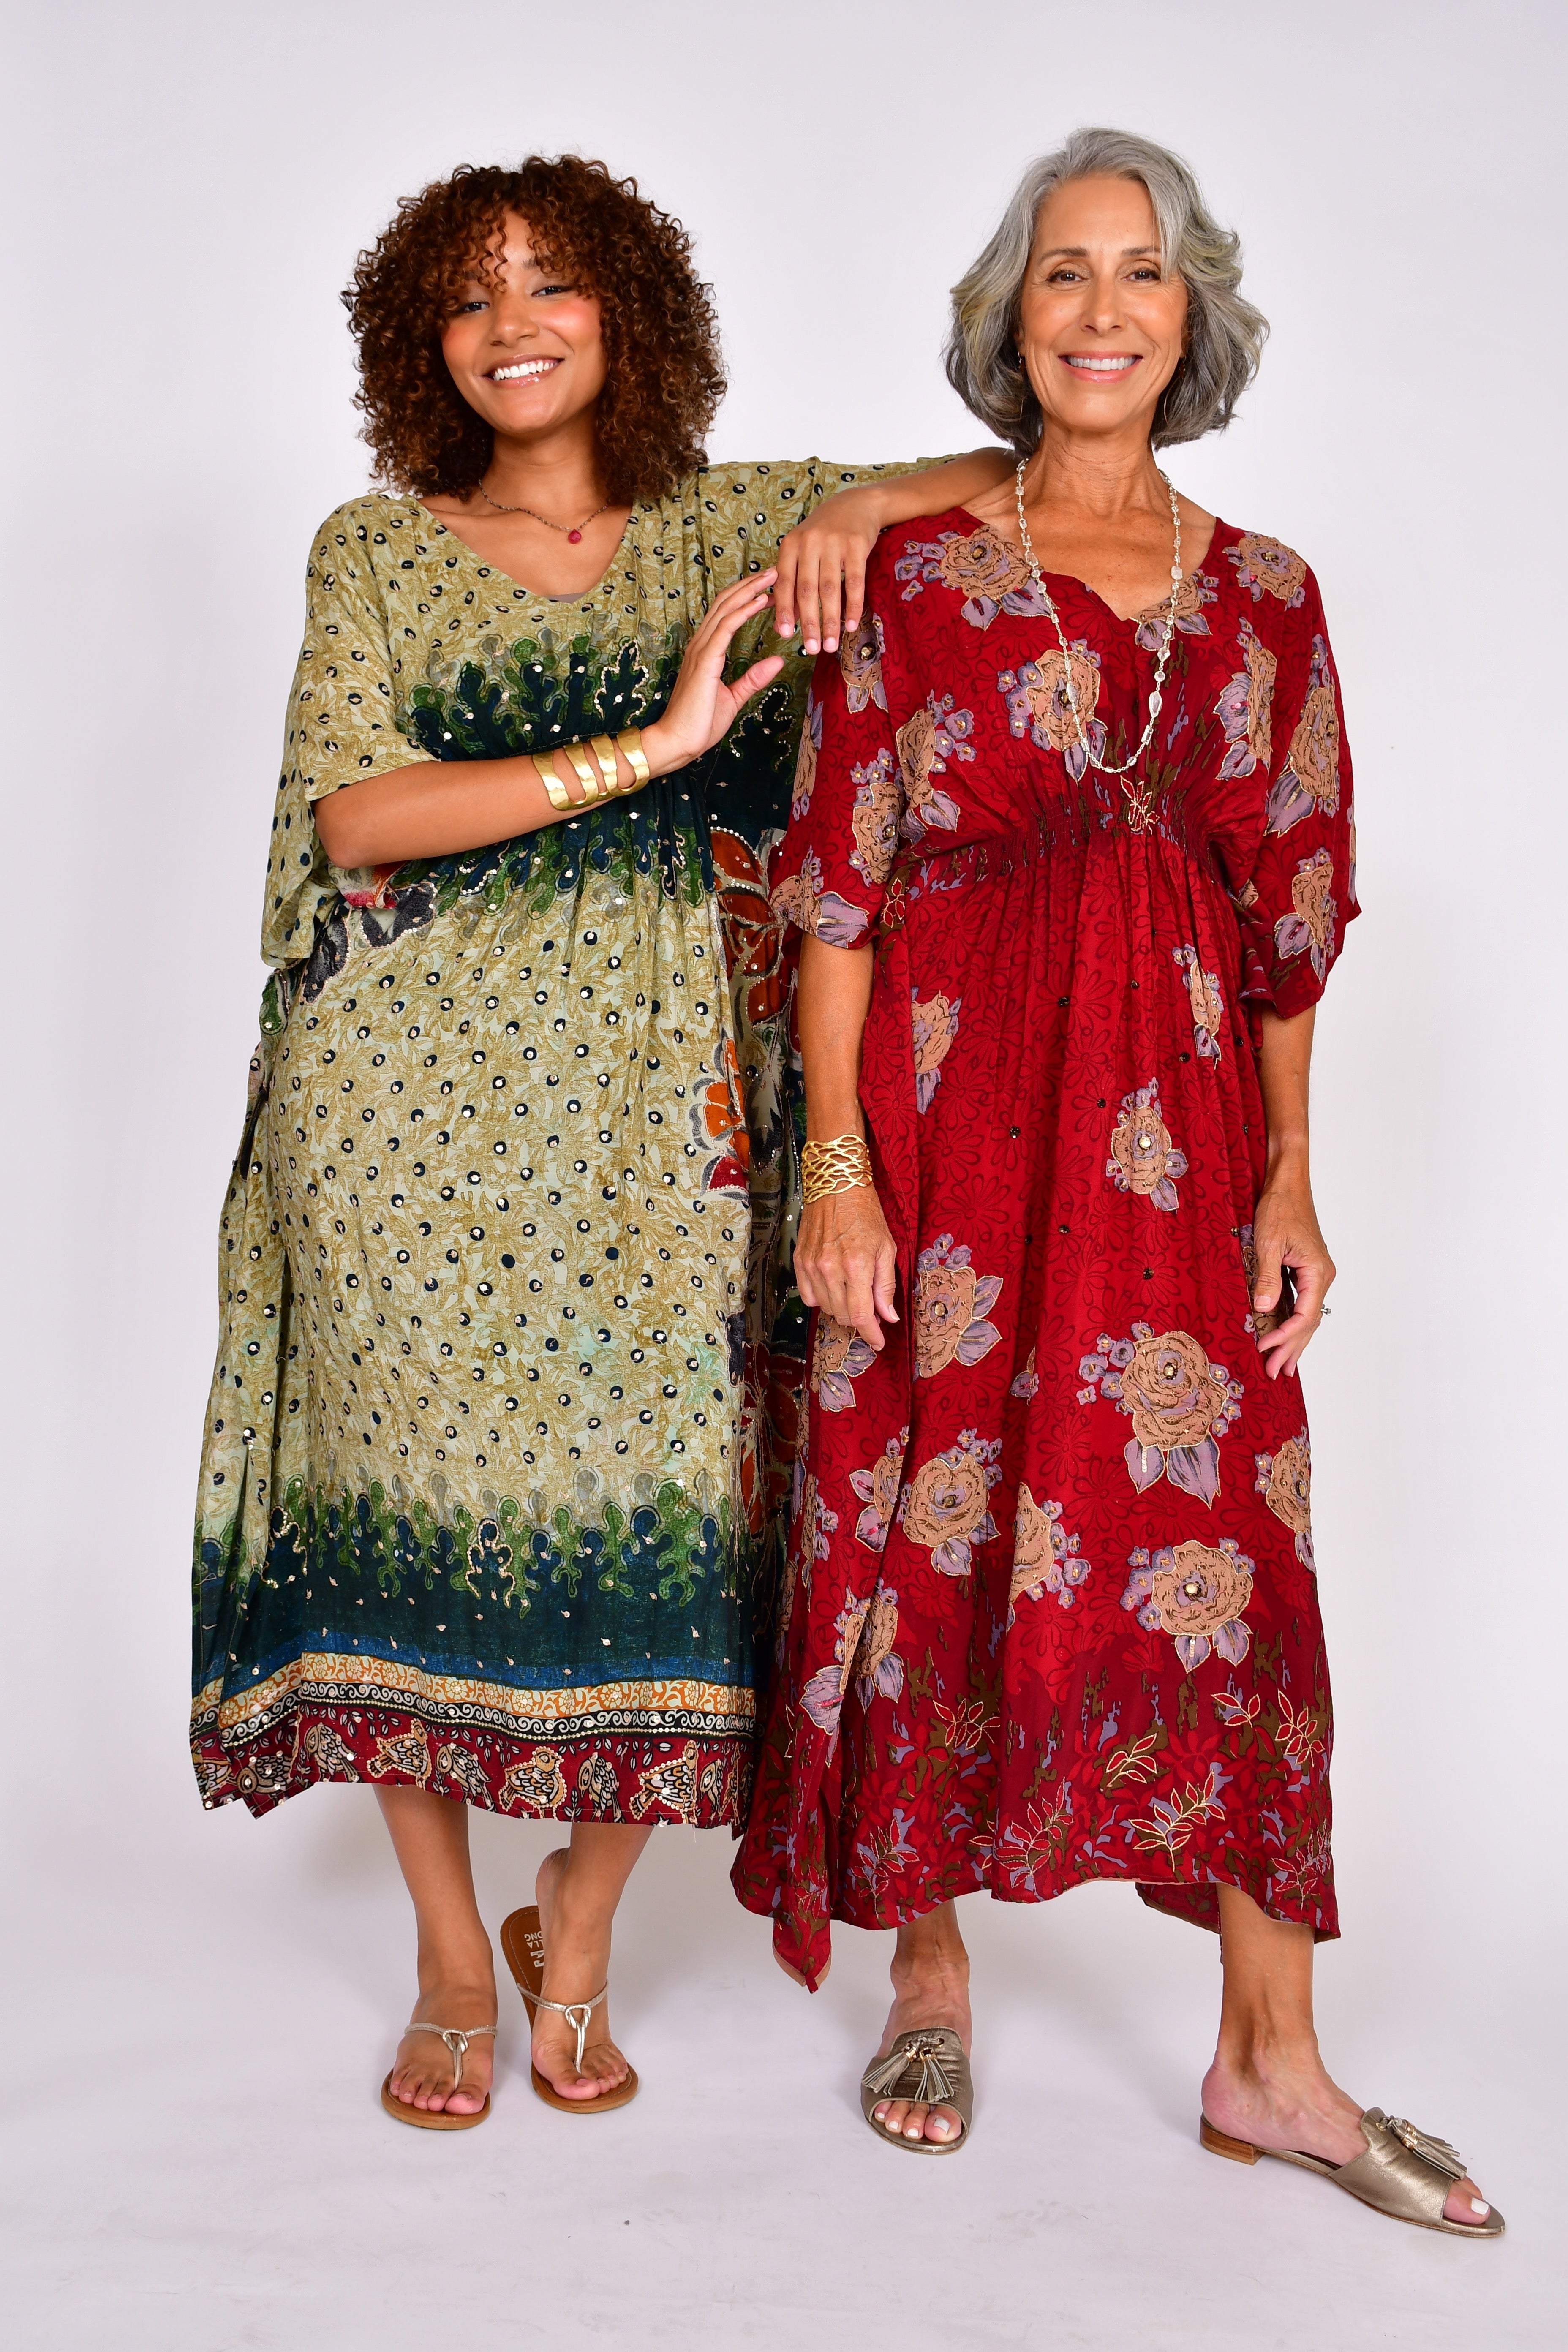 100% Vintage Silk kaftan.  Each dress is one-of-a-kind in colorful, up-cycled silk.